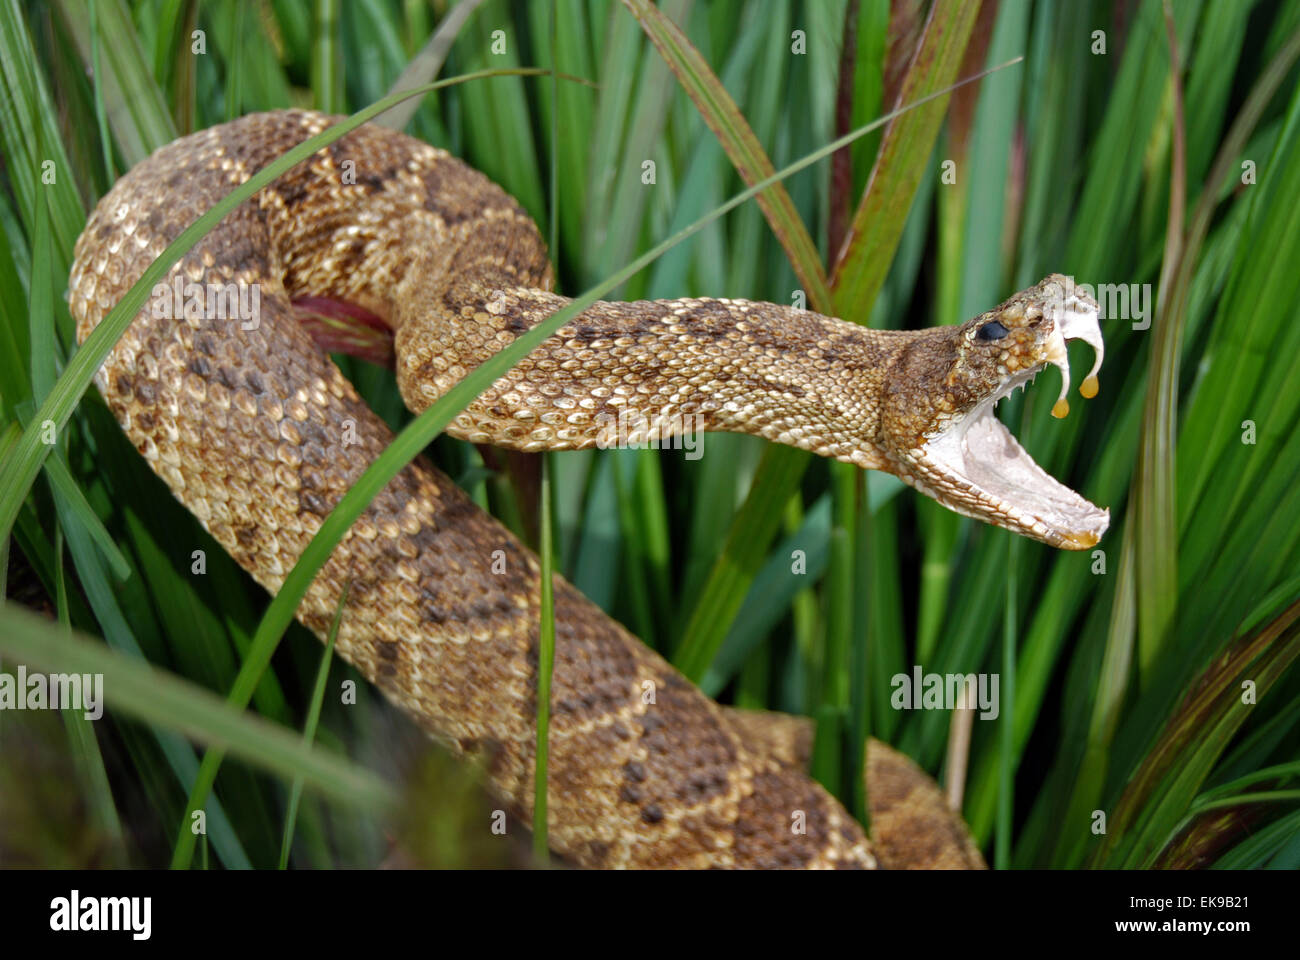 Attacking rattle snake in tall grass. Stock Photo